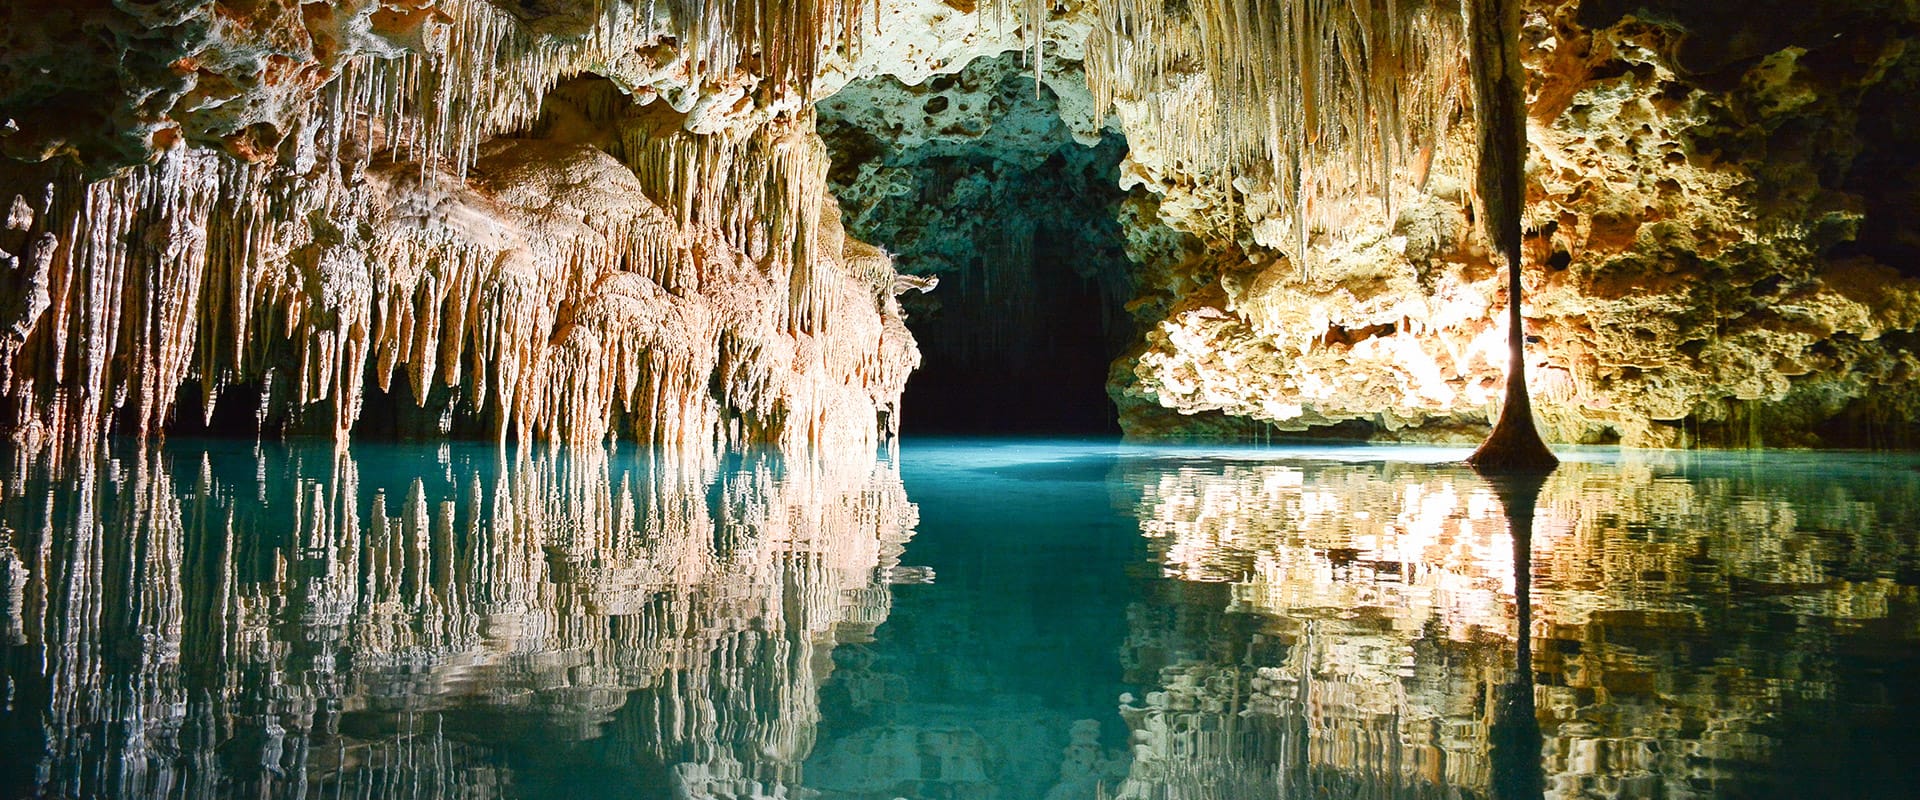 Mayan caves tour in Belize